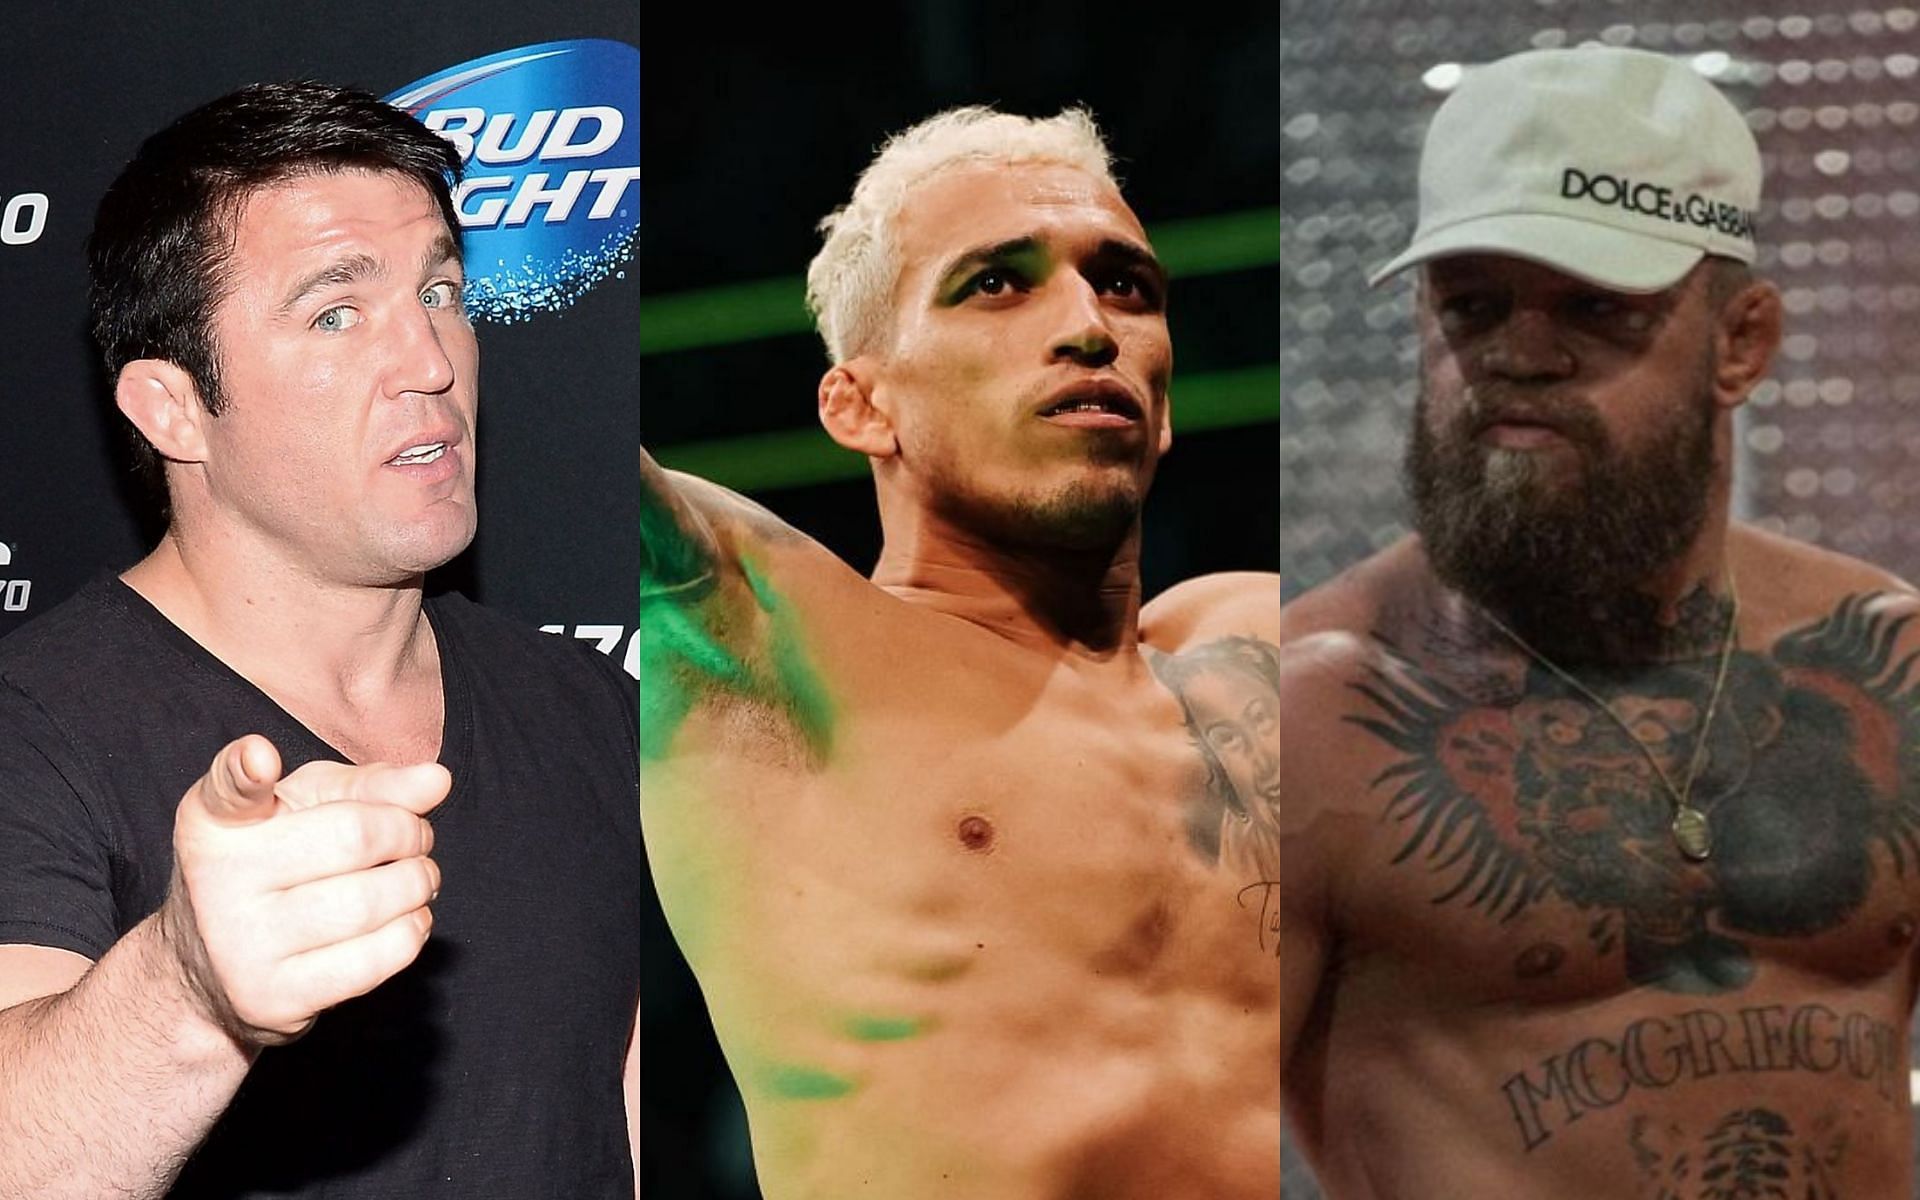 Chael Sonnen has taken a shot at Charles Oliveira for potentially taking a fight against Conor McGregor over Justin Gaethje